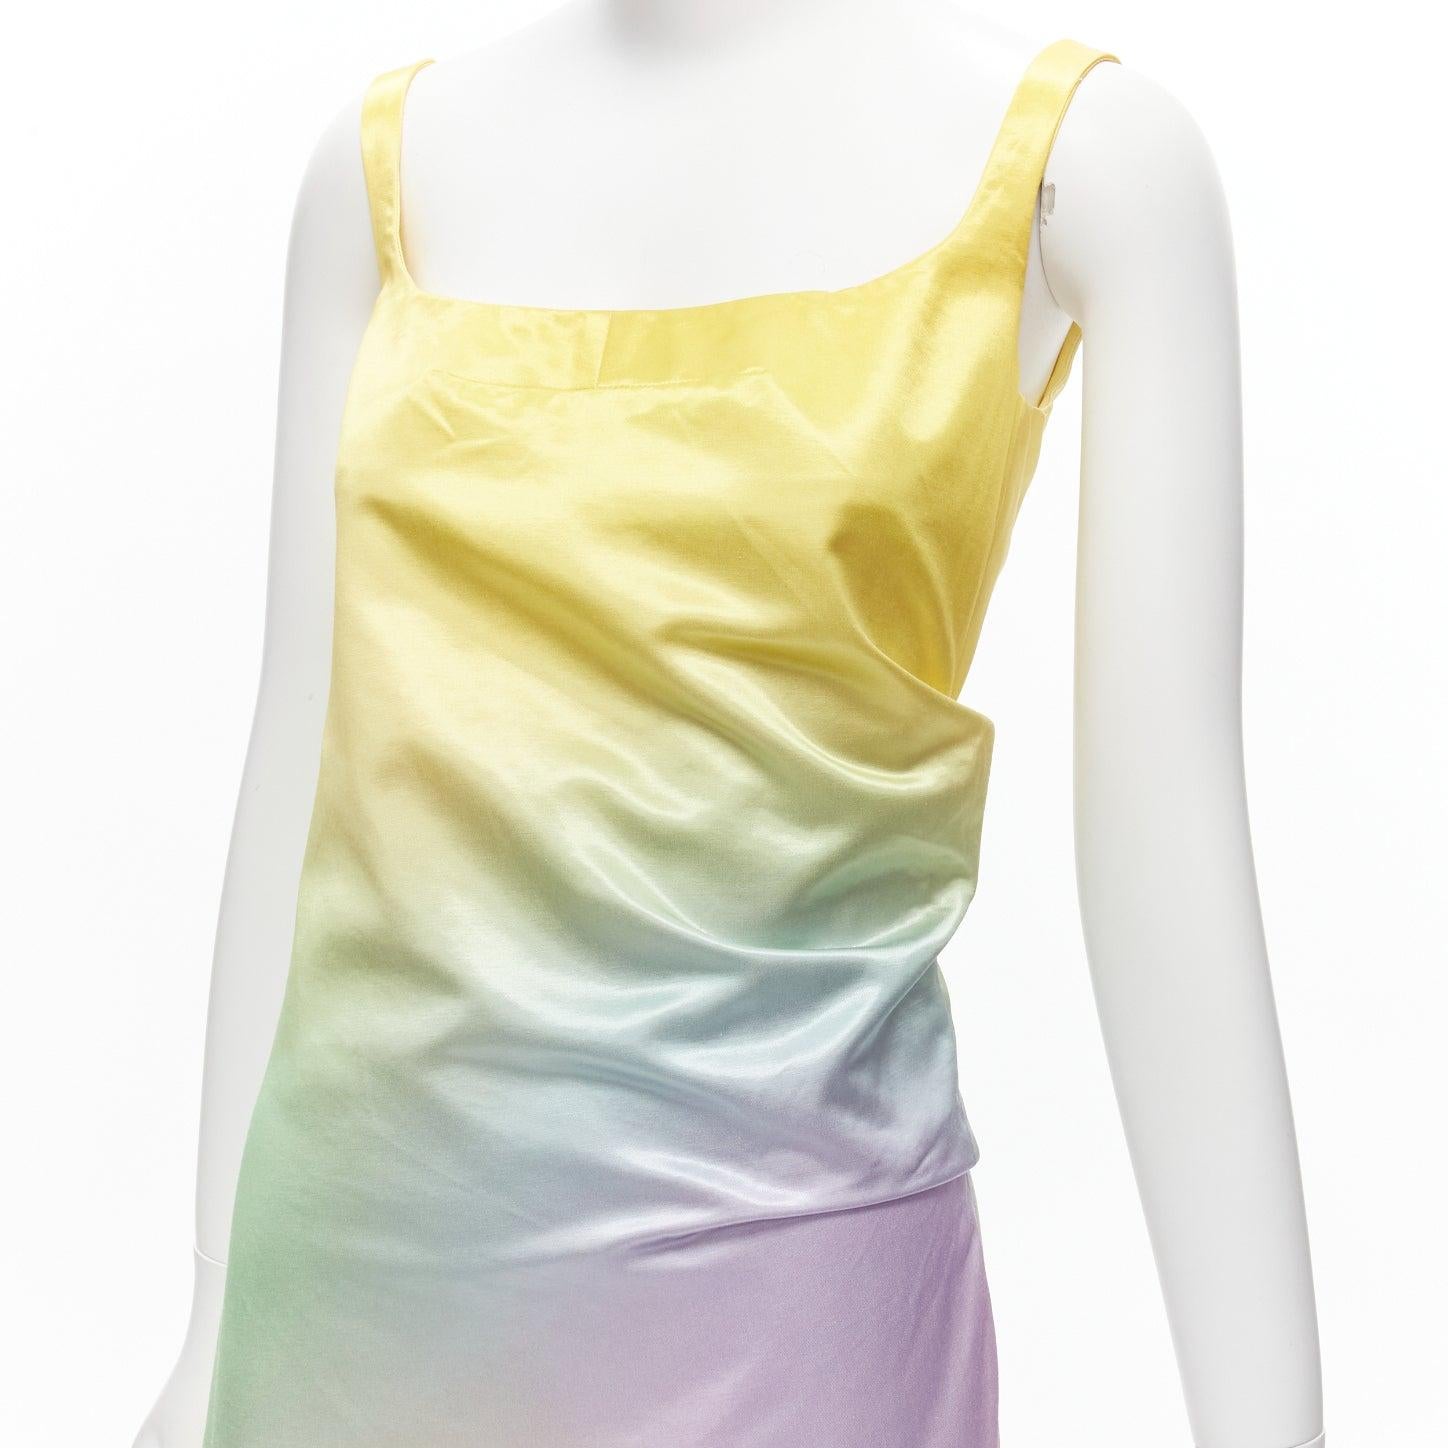 MERYLL ROGGE 2021 Runway pastel rainbow ombre rainbow drape side scoop neck dress FR36 S
Reference: BSHW/A00015
Brand: Meryll Rogge
Collection: 2021 - Runway
As seen on: Kathryn Gallagher
Material: Cotton, Blend
Color: Multicolour
Pattern: